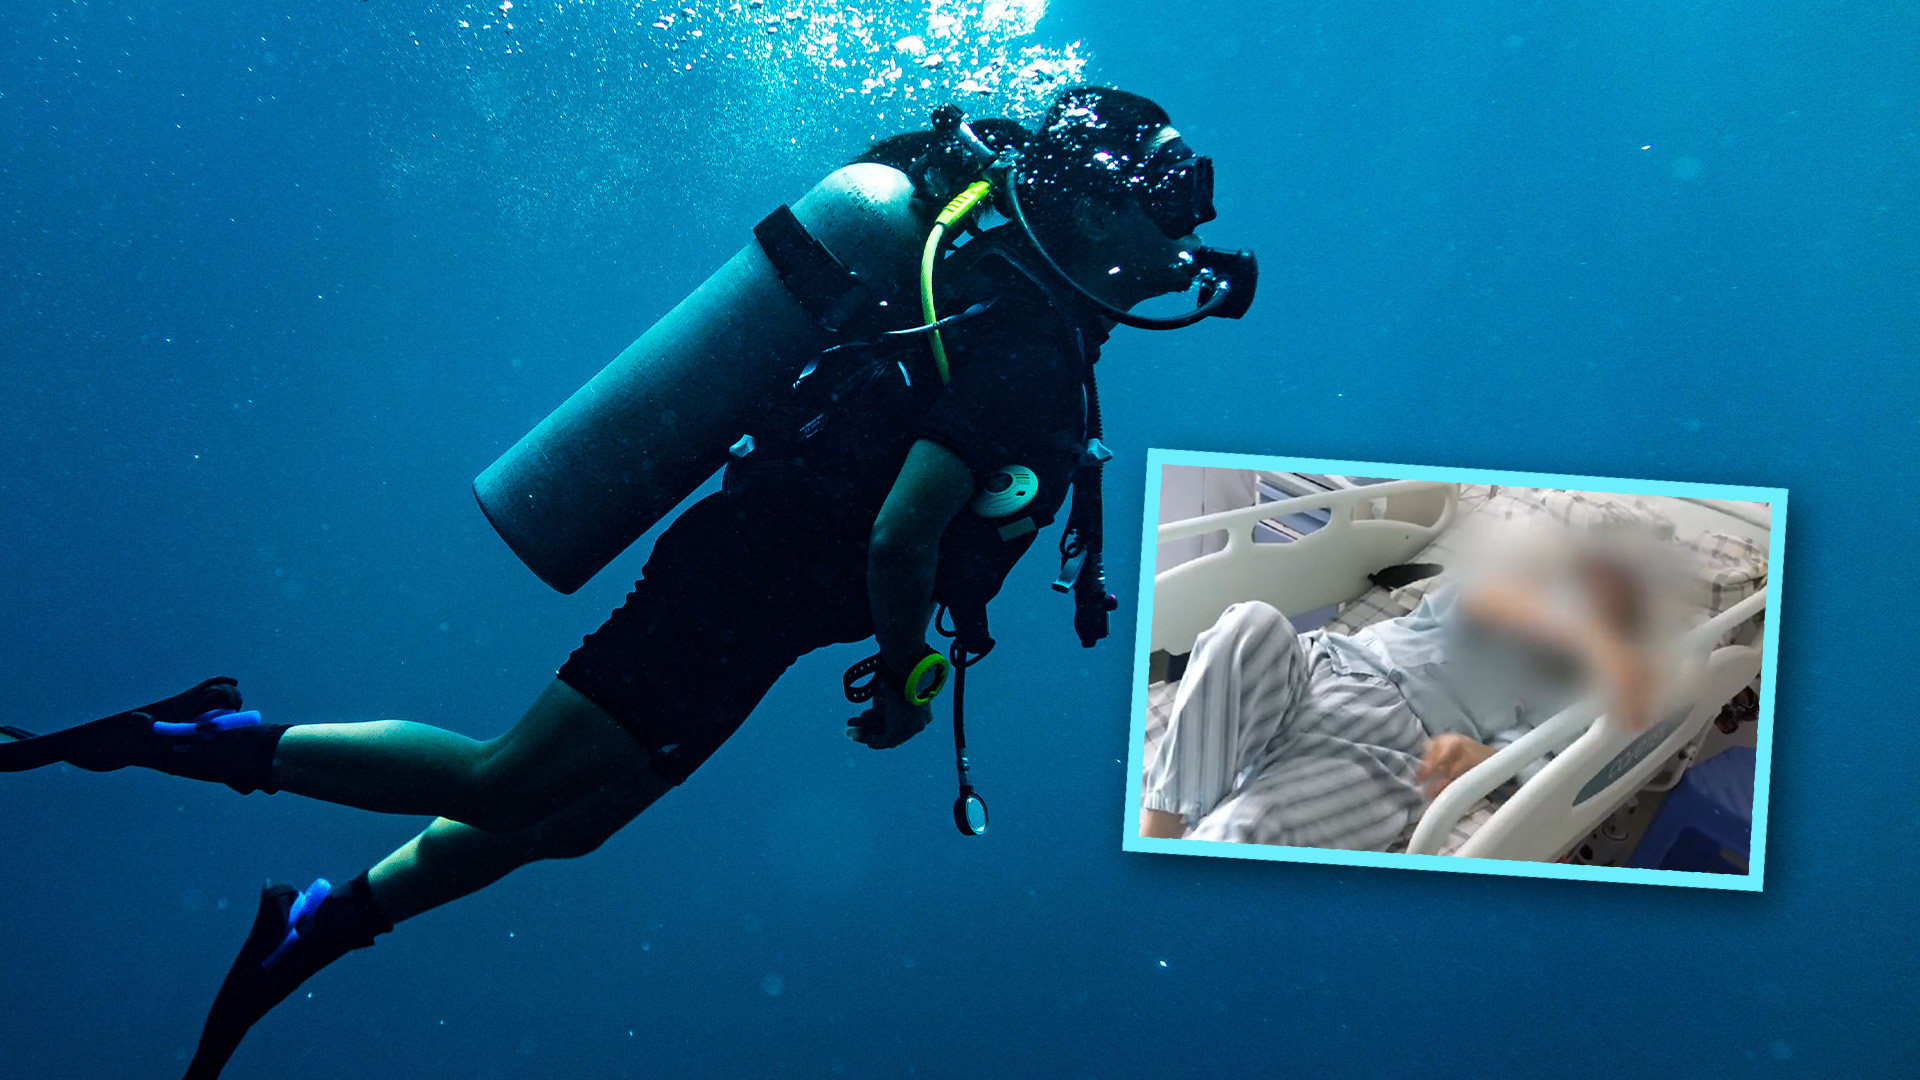 A thrill-seeking woman diver in China has amazed doctors and mainland social media by coming out of a month-long coma she was plunged into during a diving accident involving lead weights. Photo: SCMP composite/Shutterstock/Weibo